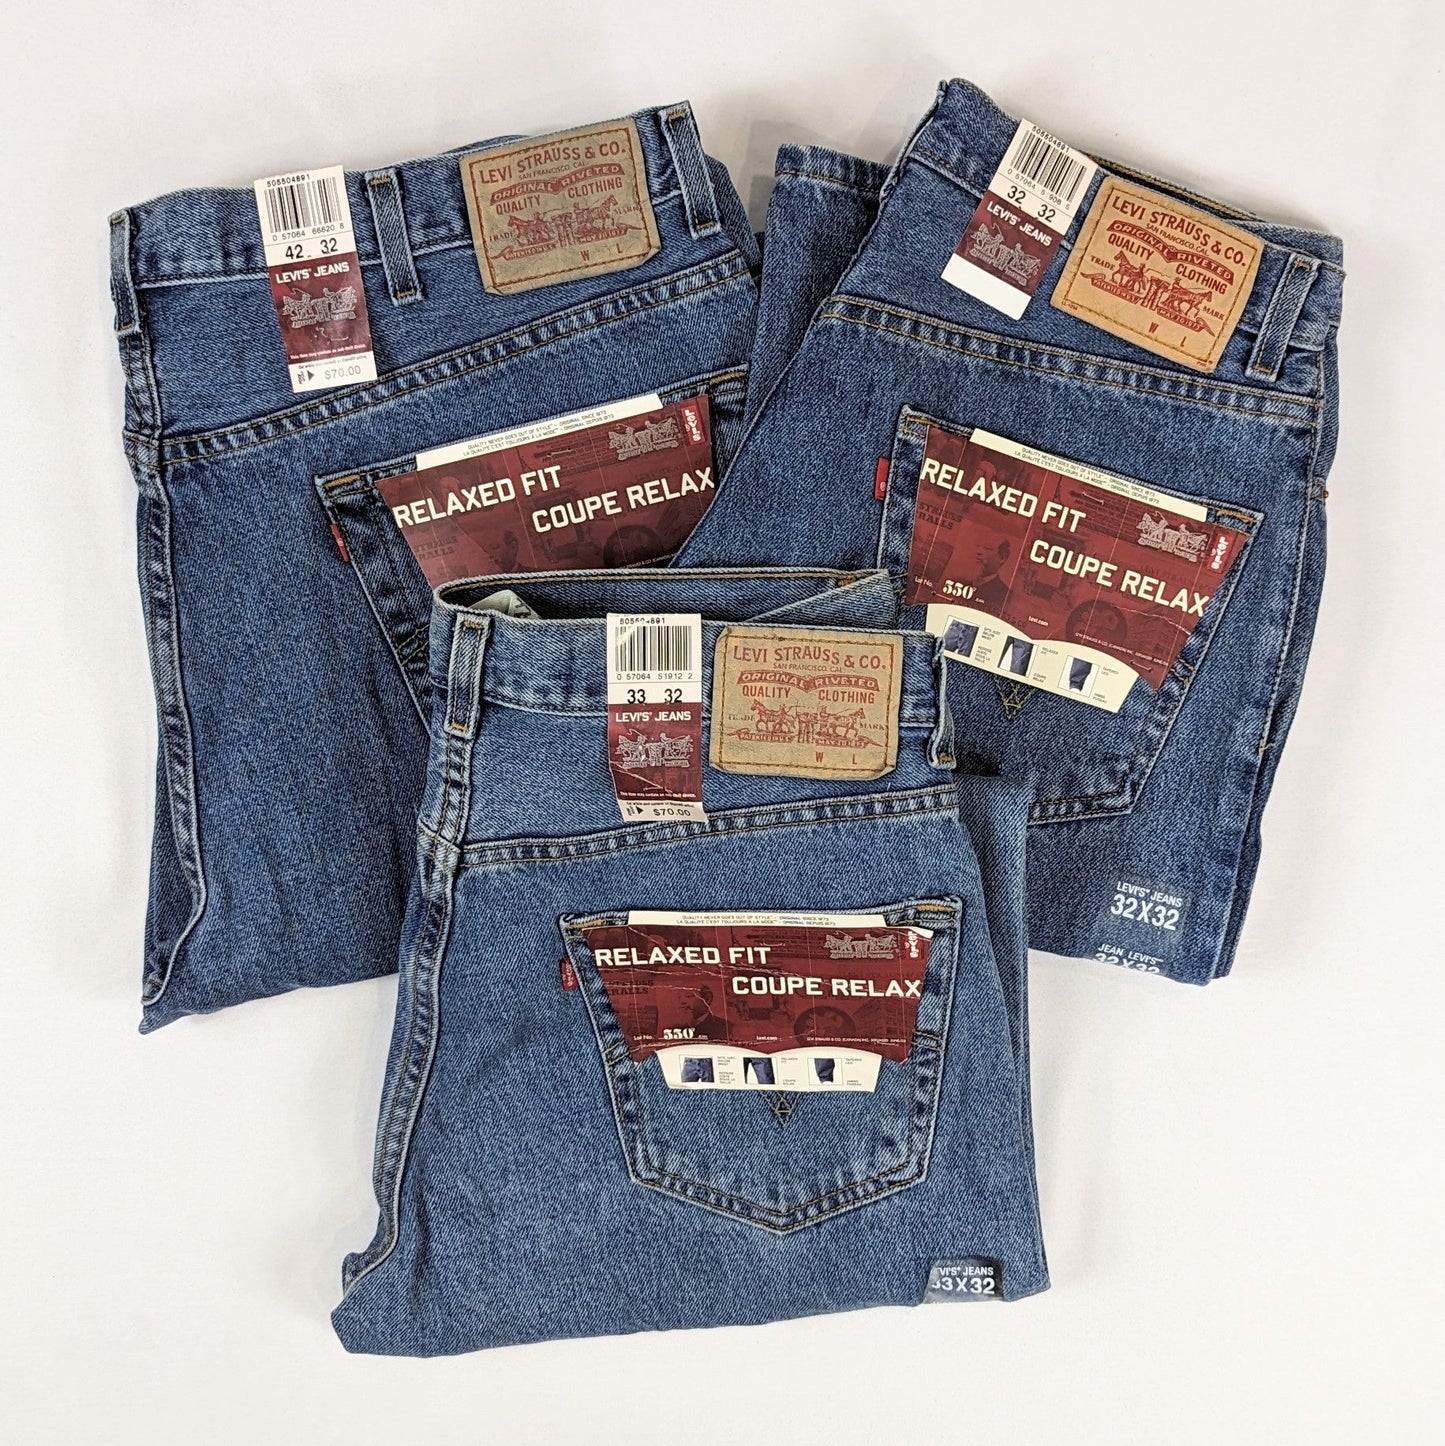 Levis jeans deadstock relaxed fit 550 thick cotton 2000s